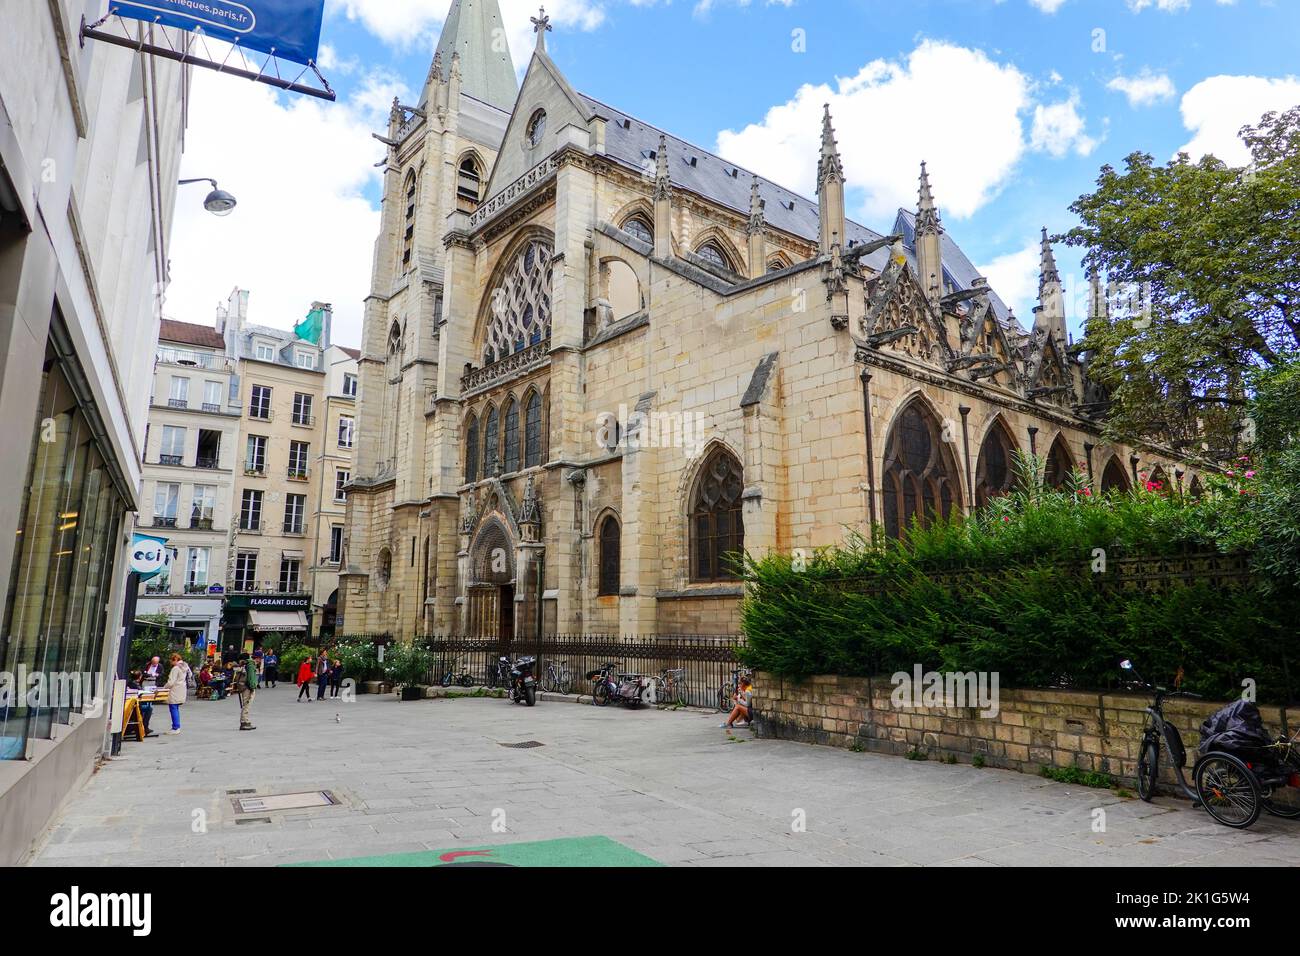 The Church of Saint-Séverin is a Roman Catholic church in the 5th arrondissement, or Latin Quarter of Paris, FR, on a now heavily touristed street. Stock Photo